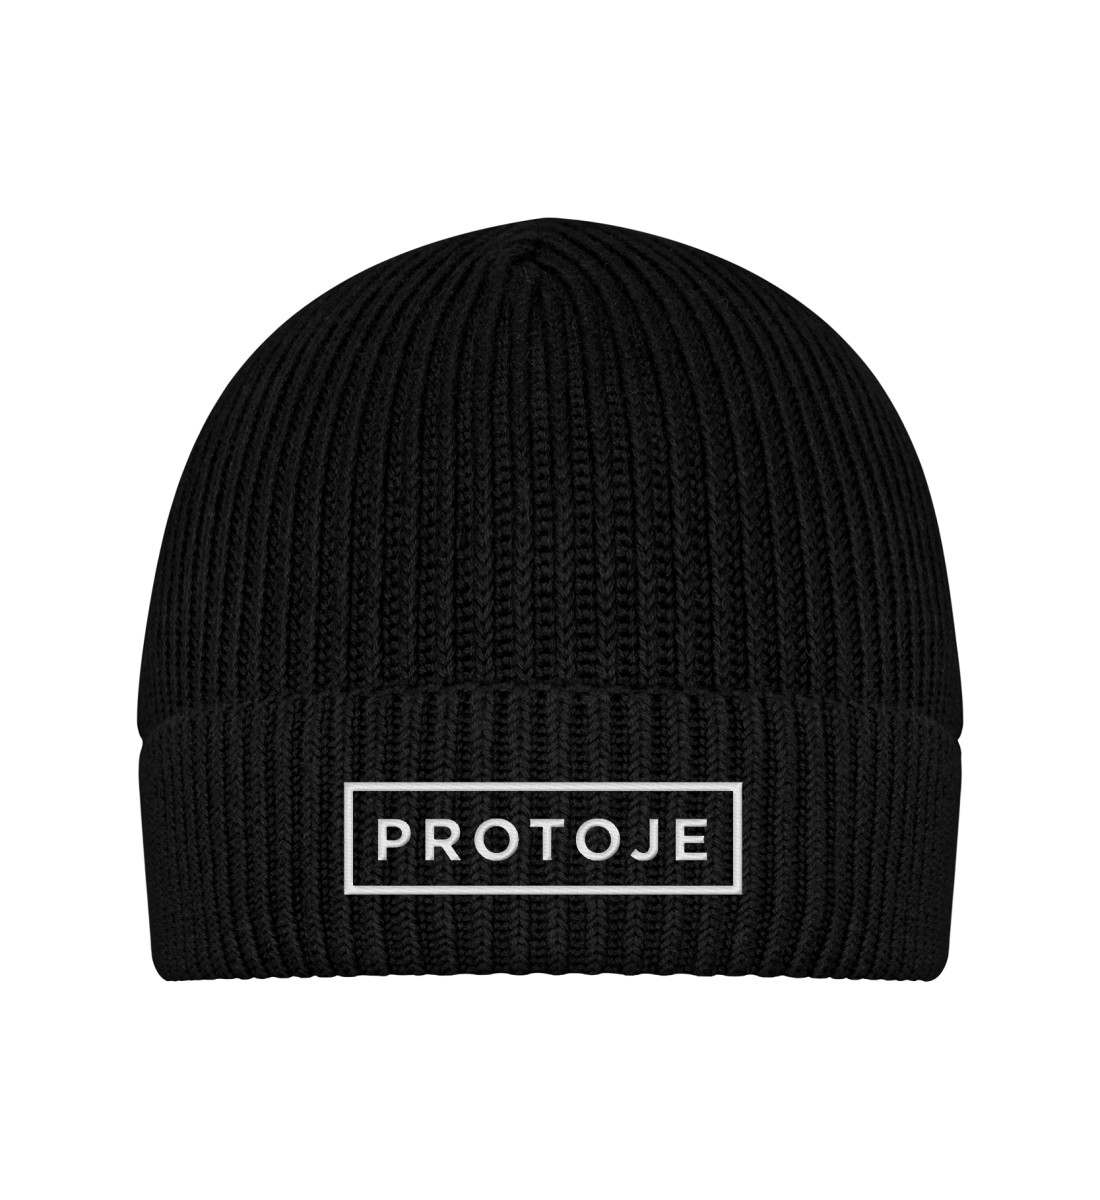 Protoje Reggae Music Beanie - Fisherman's Hat ST/ST with Embroidery-16